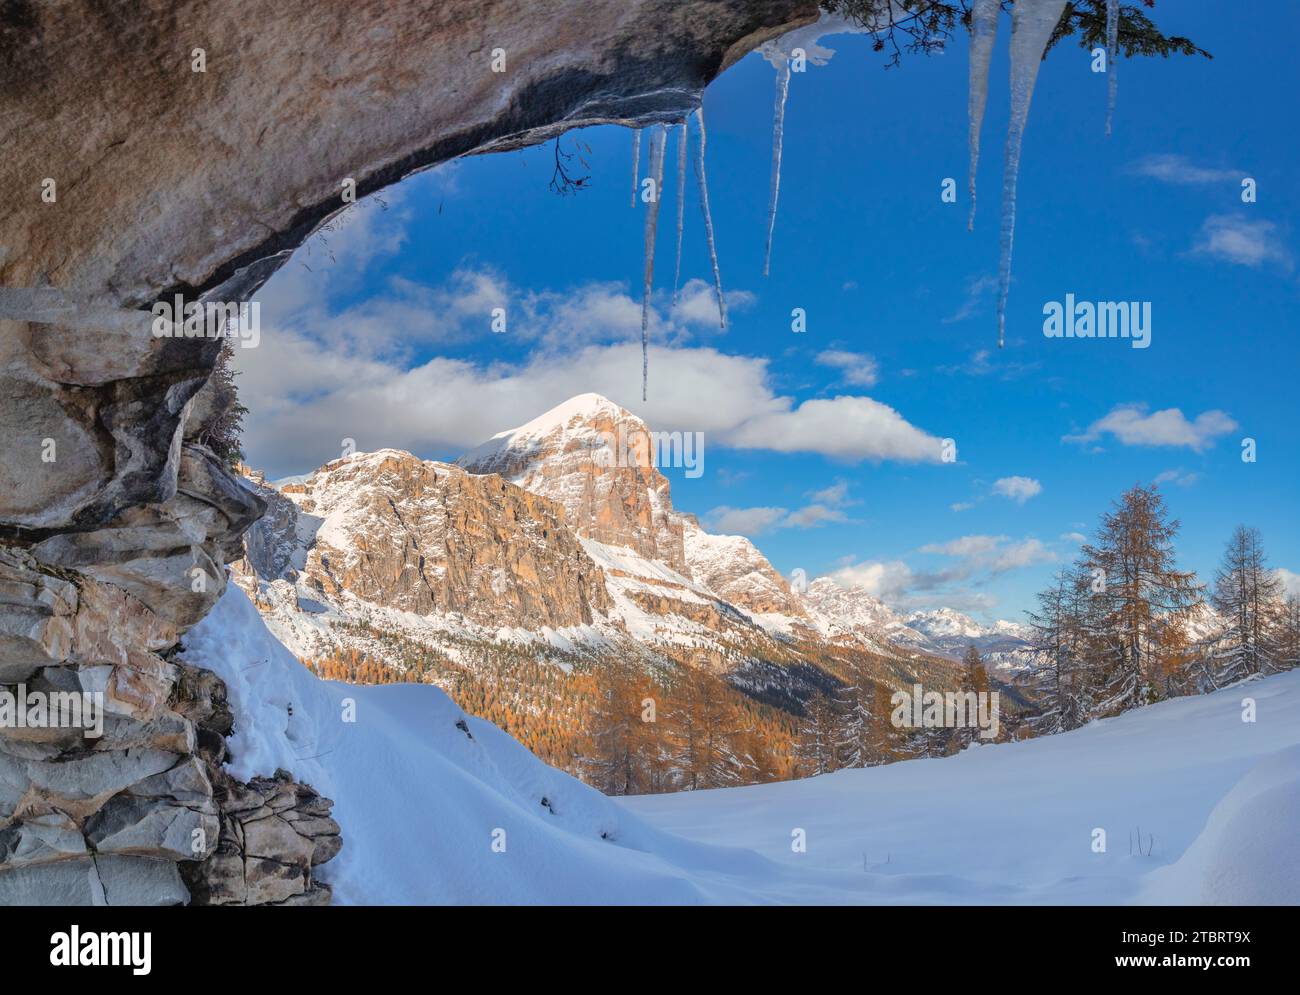 Italy, Veneto, province of Belluno, a winter view of the Tofana di Rozes from a rock cave with icicles hanging from above, Dolomites Stock Photo